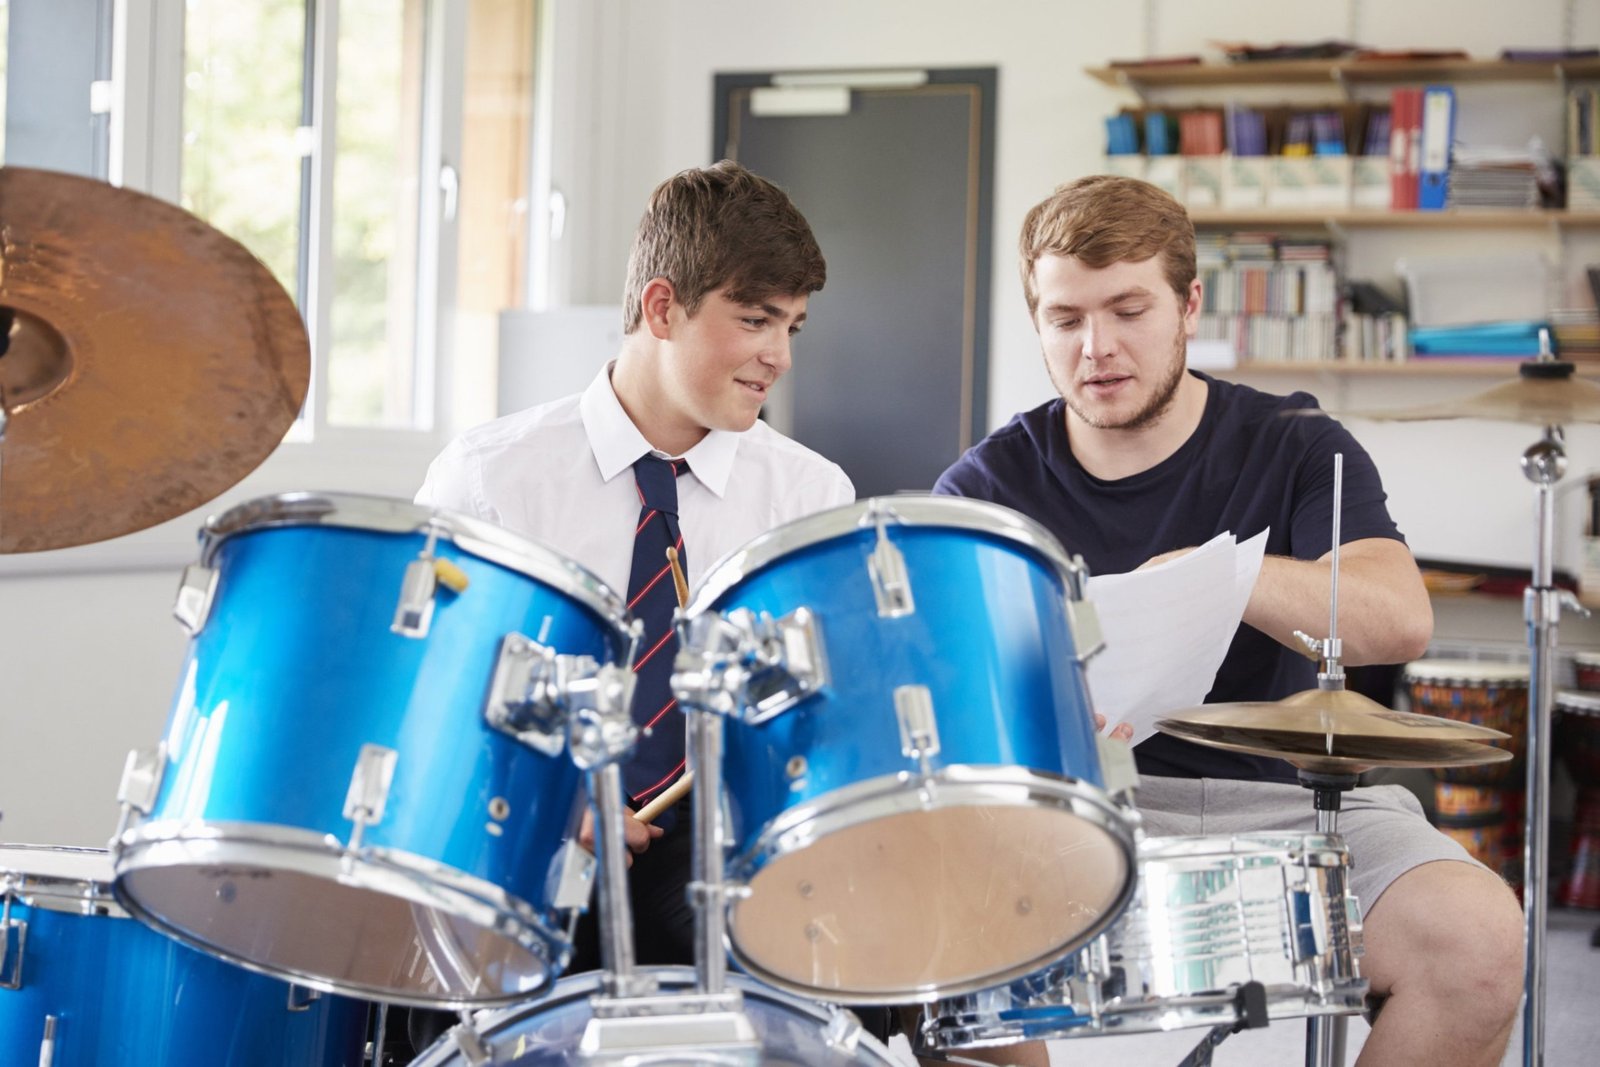 male-pupil-with-teacher-playing-drums-in-music-les-2021-08-26-16-13-39-utc.jpg